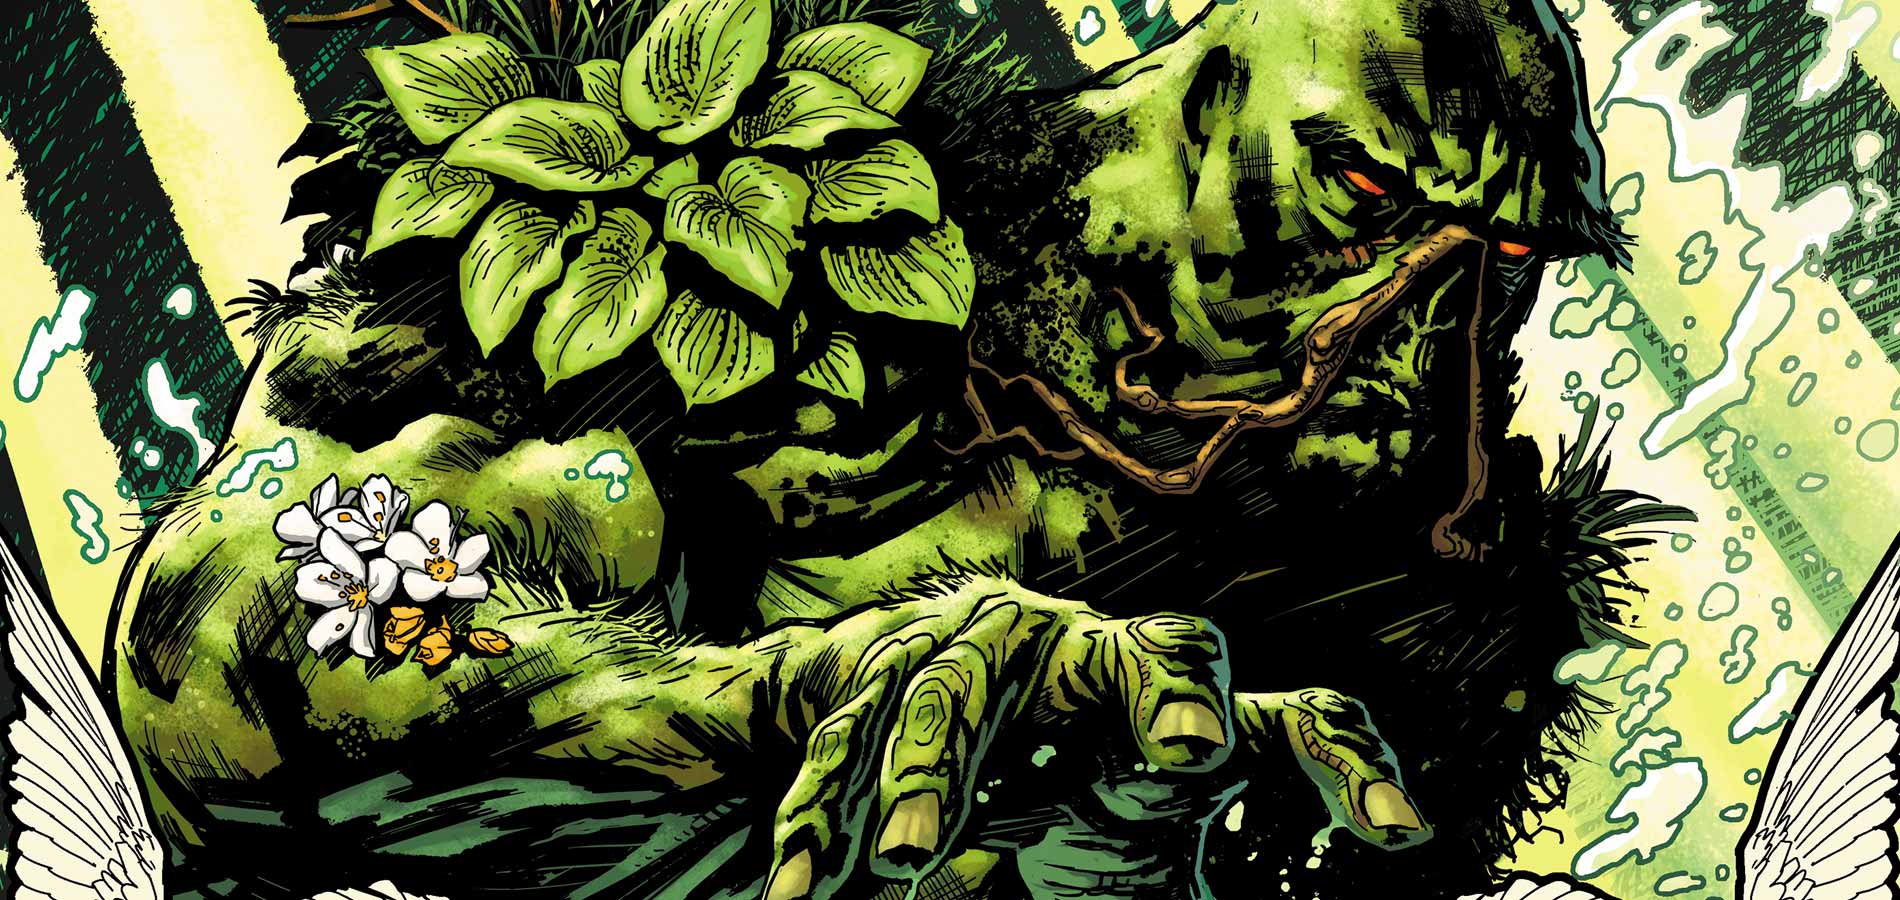 The Swamp Thing. Image from dccomics.com